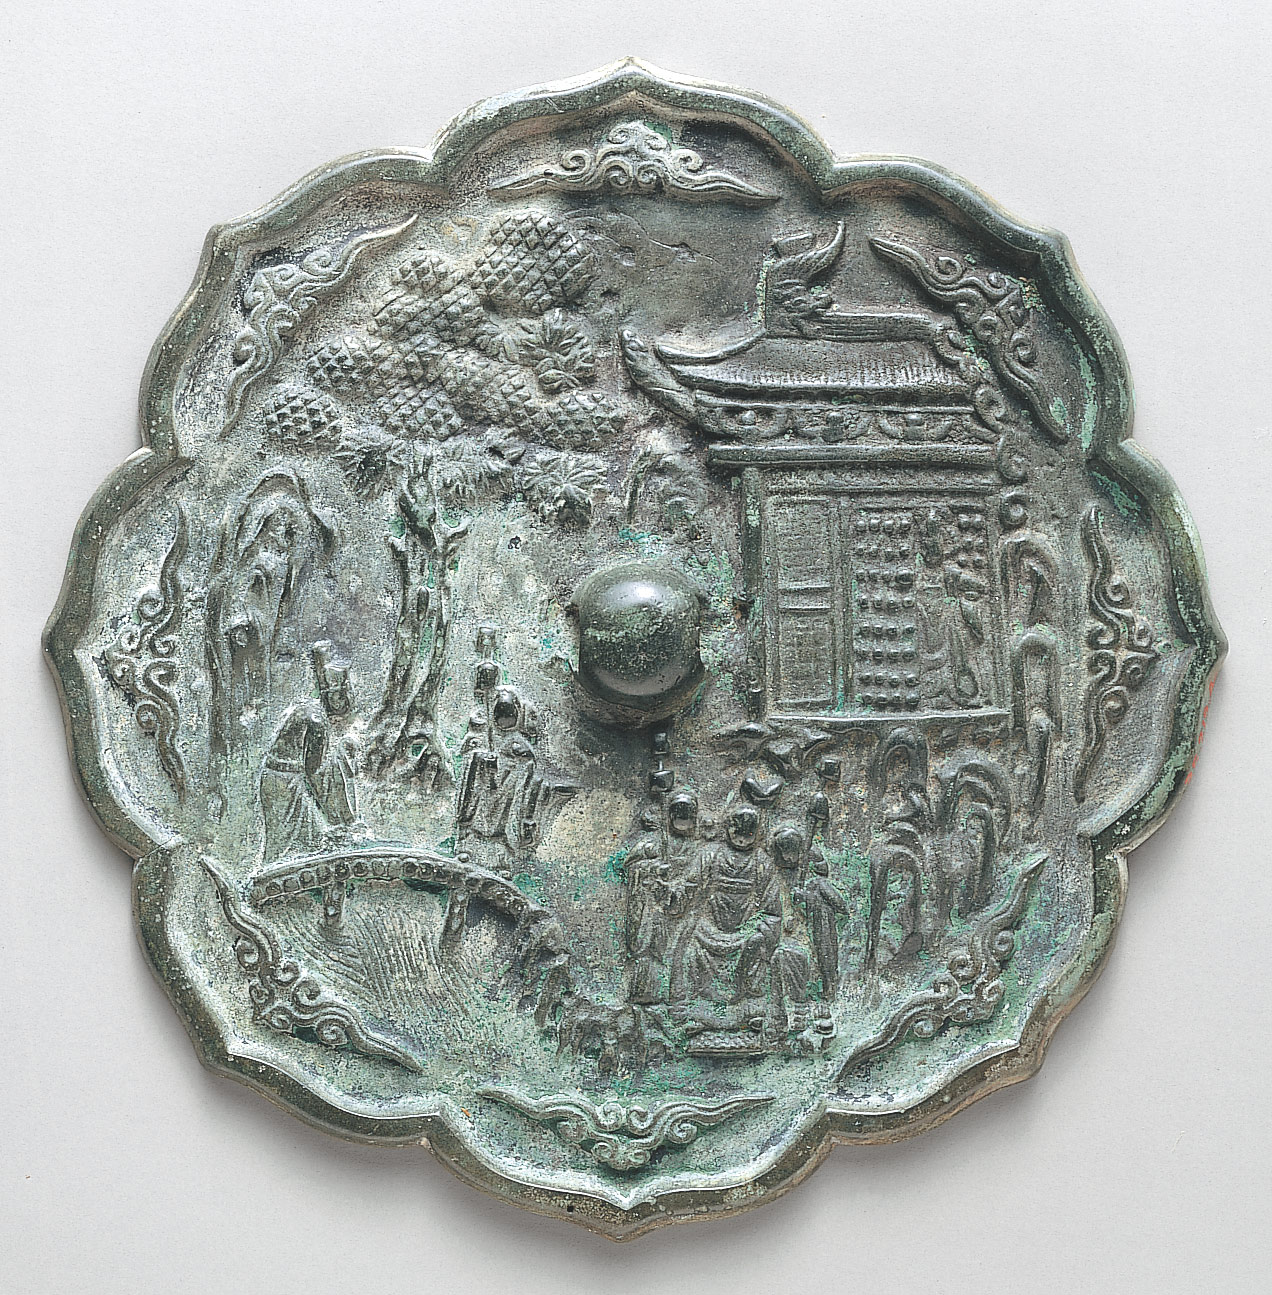 Mirror with decoration of figures in a landscape